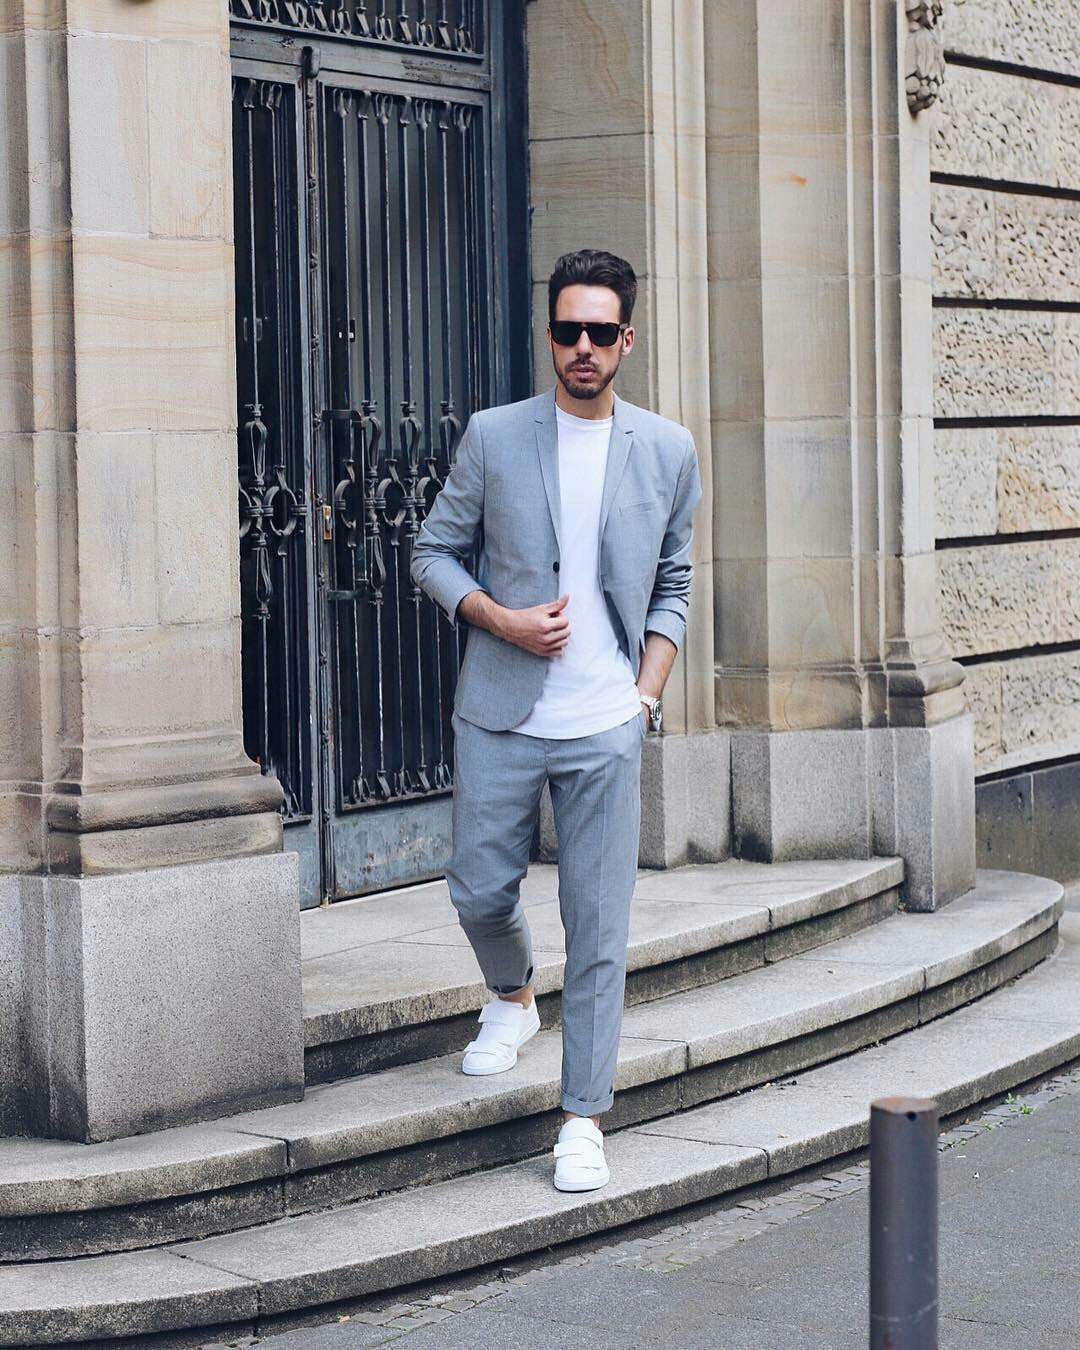 Minimal Street Style Looks For Men – LIFESTYLE BY PS